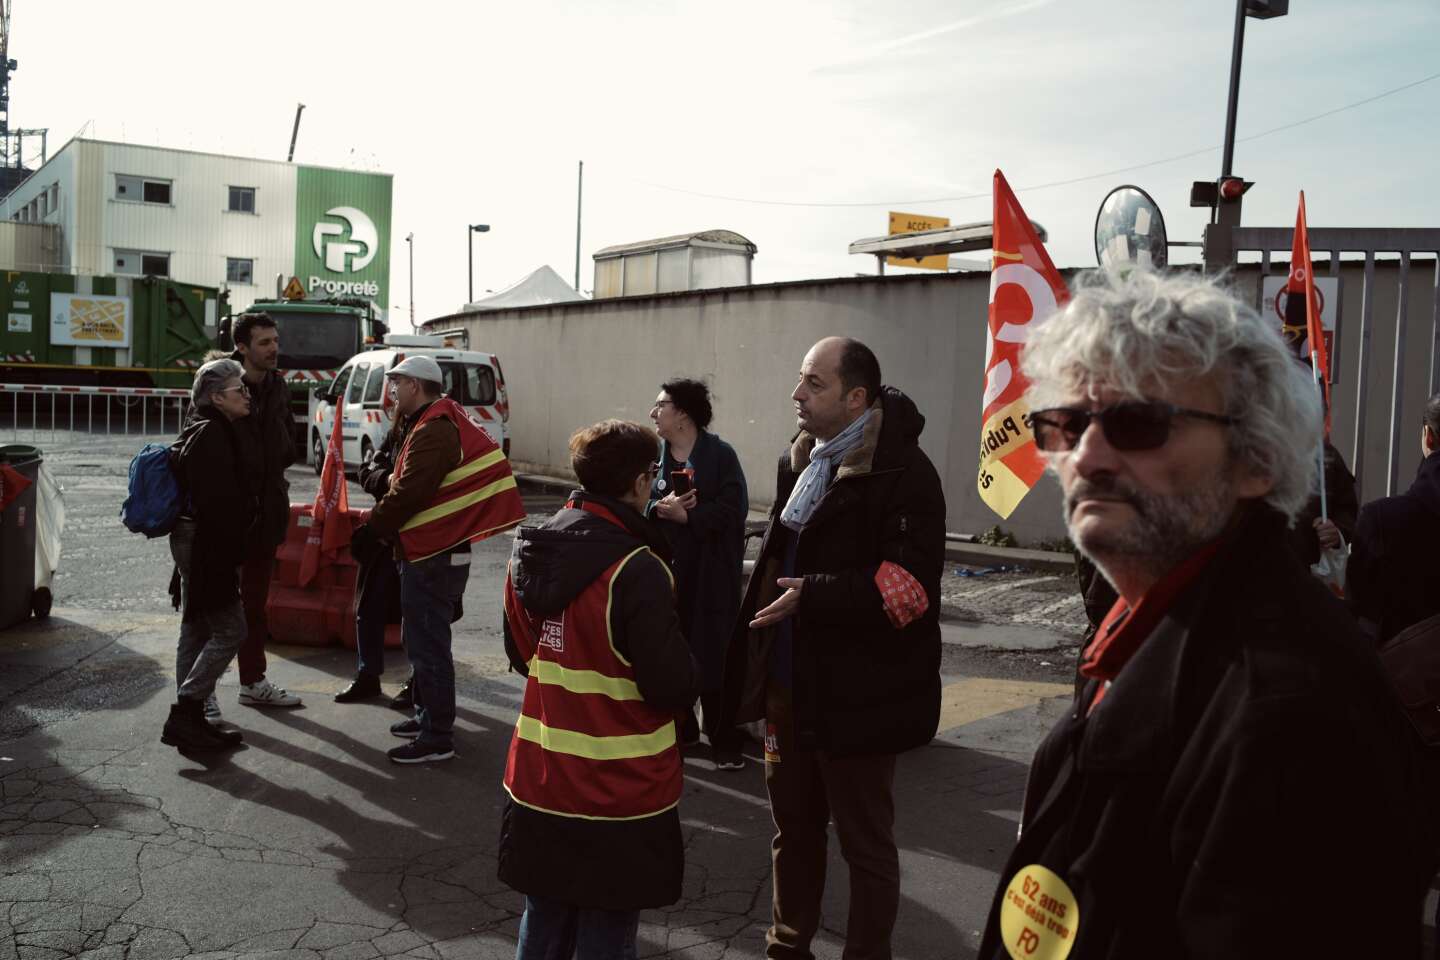 In Paris, the garbage collectors’ strike intensifies and turns into a showdown between the town hall and the government